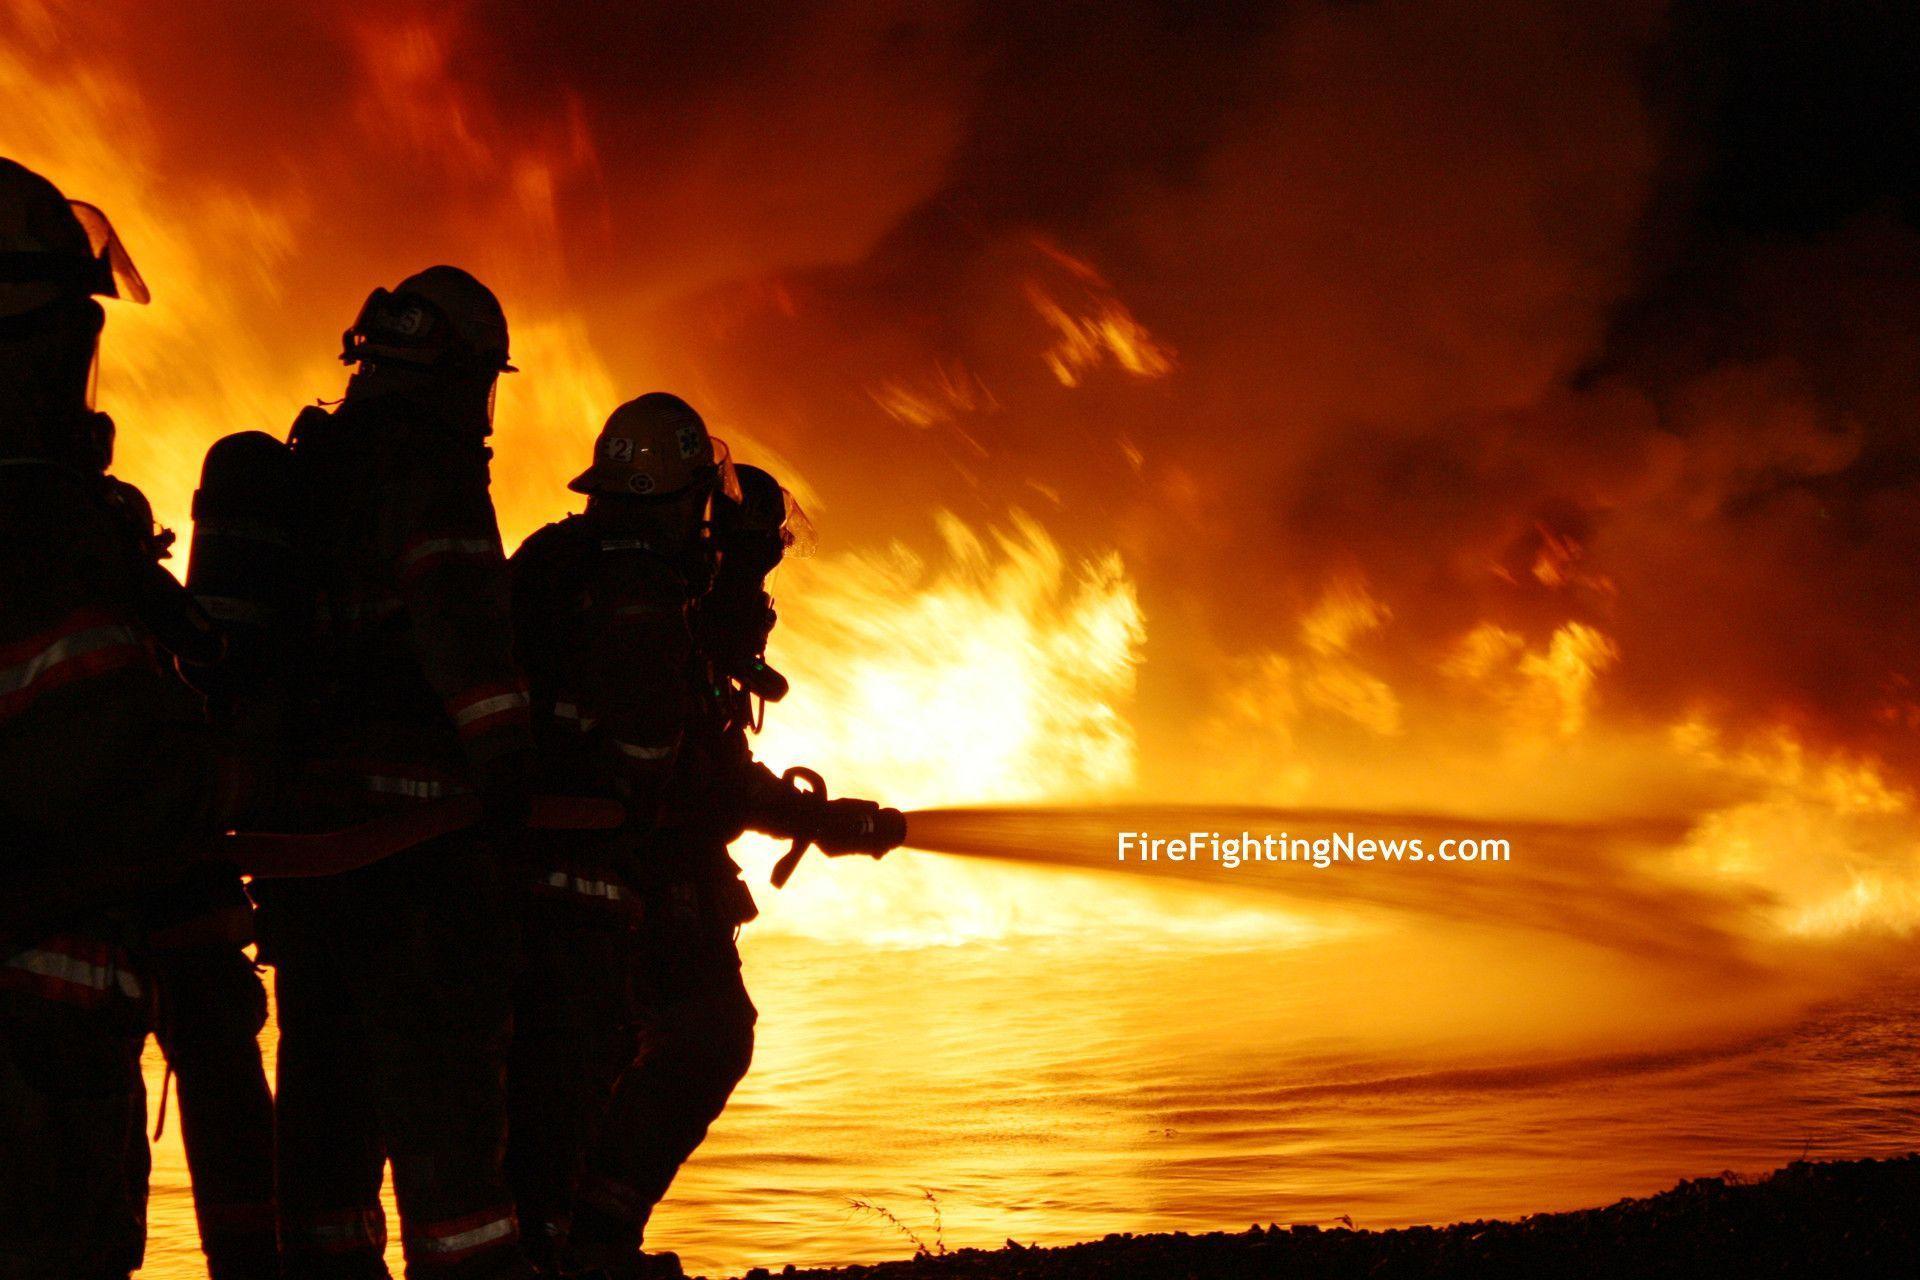 Firefighter Wallpapers For Computer Wallpaper Cave HD Wallpapers Download Free Images Wallpaper [wallpaper981.blogspot.com]